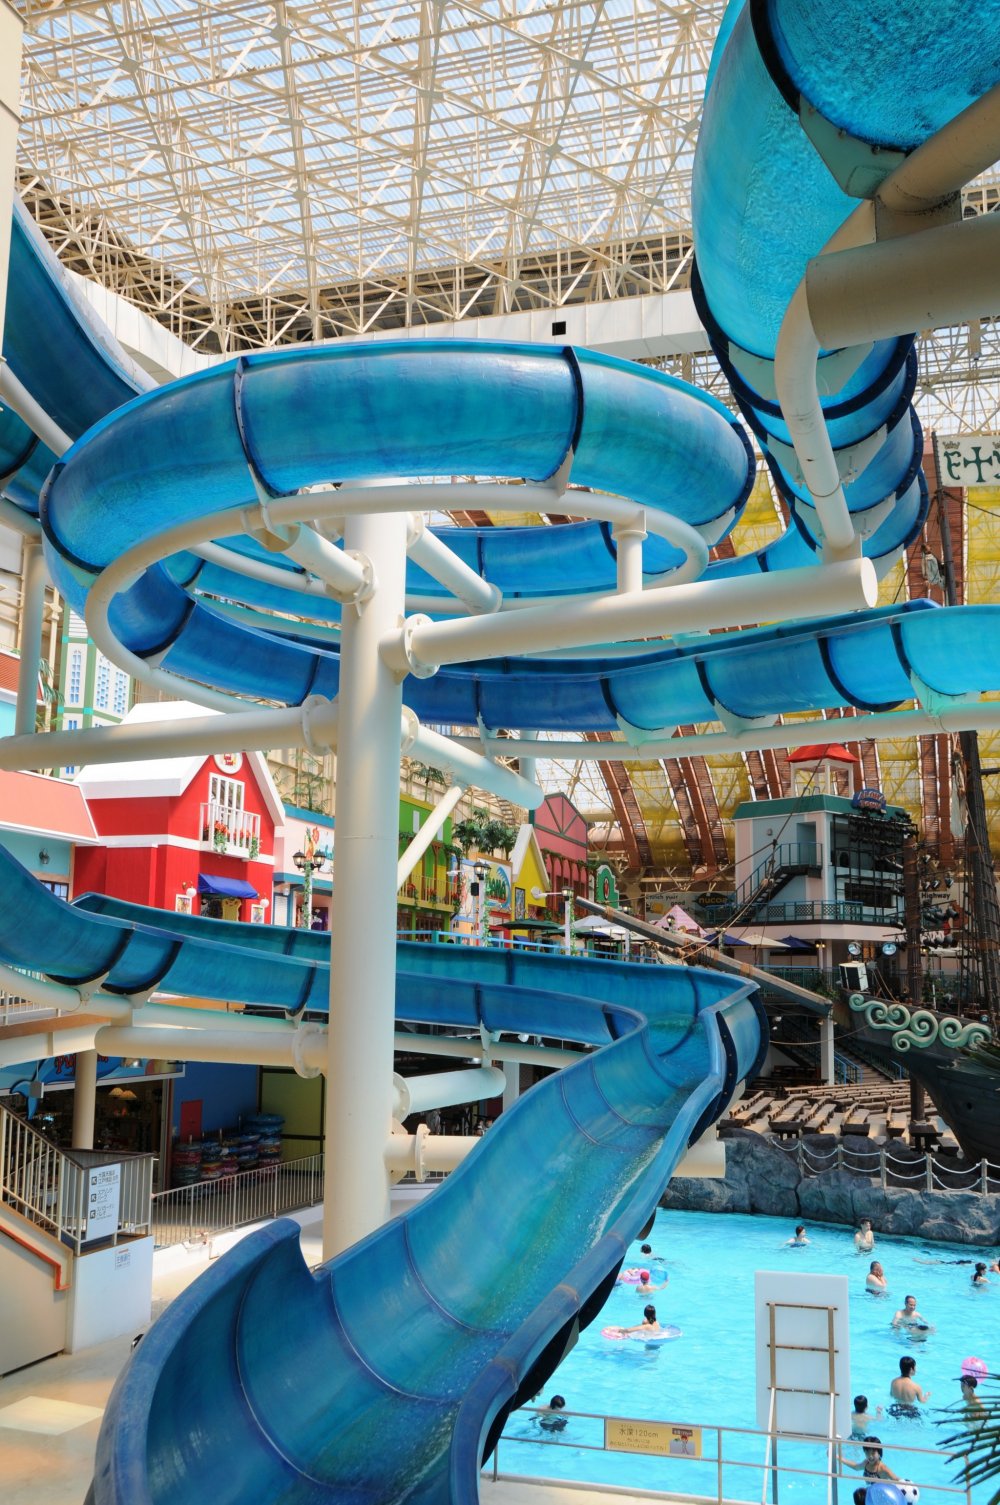 One of the water slides